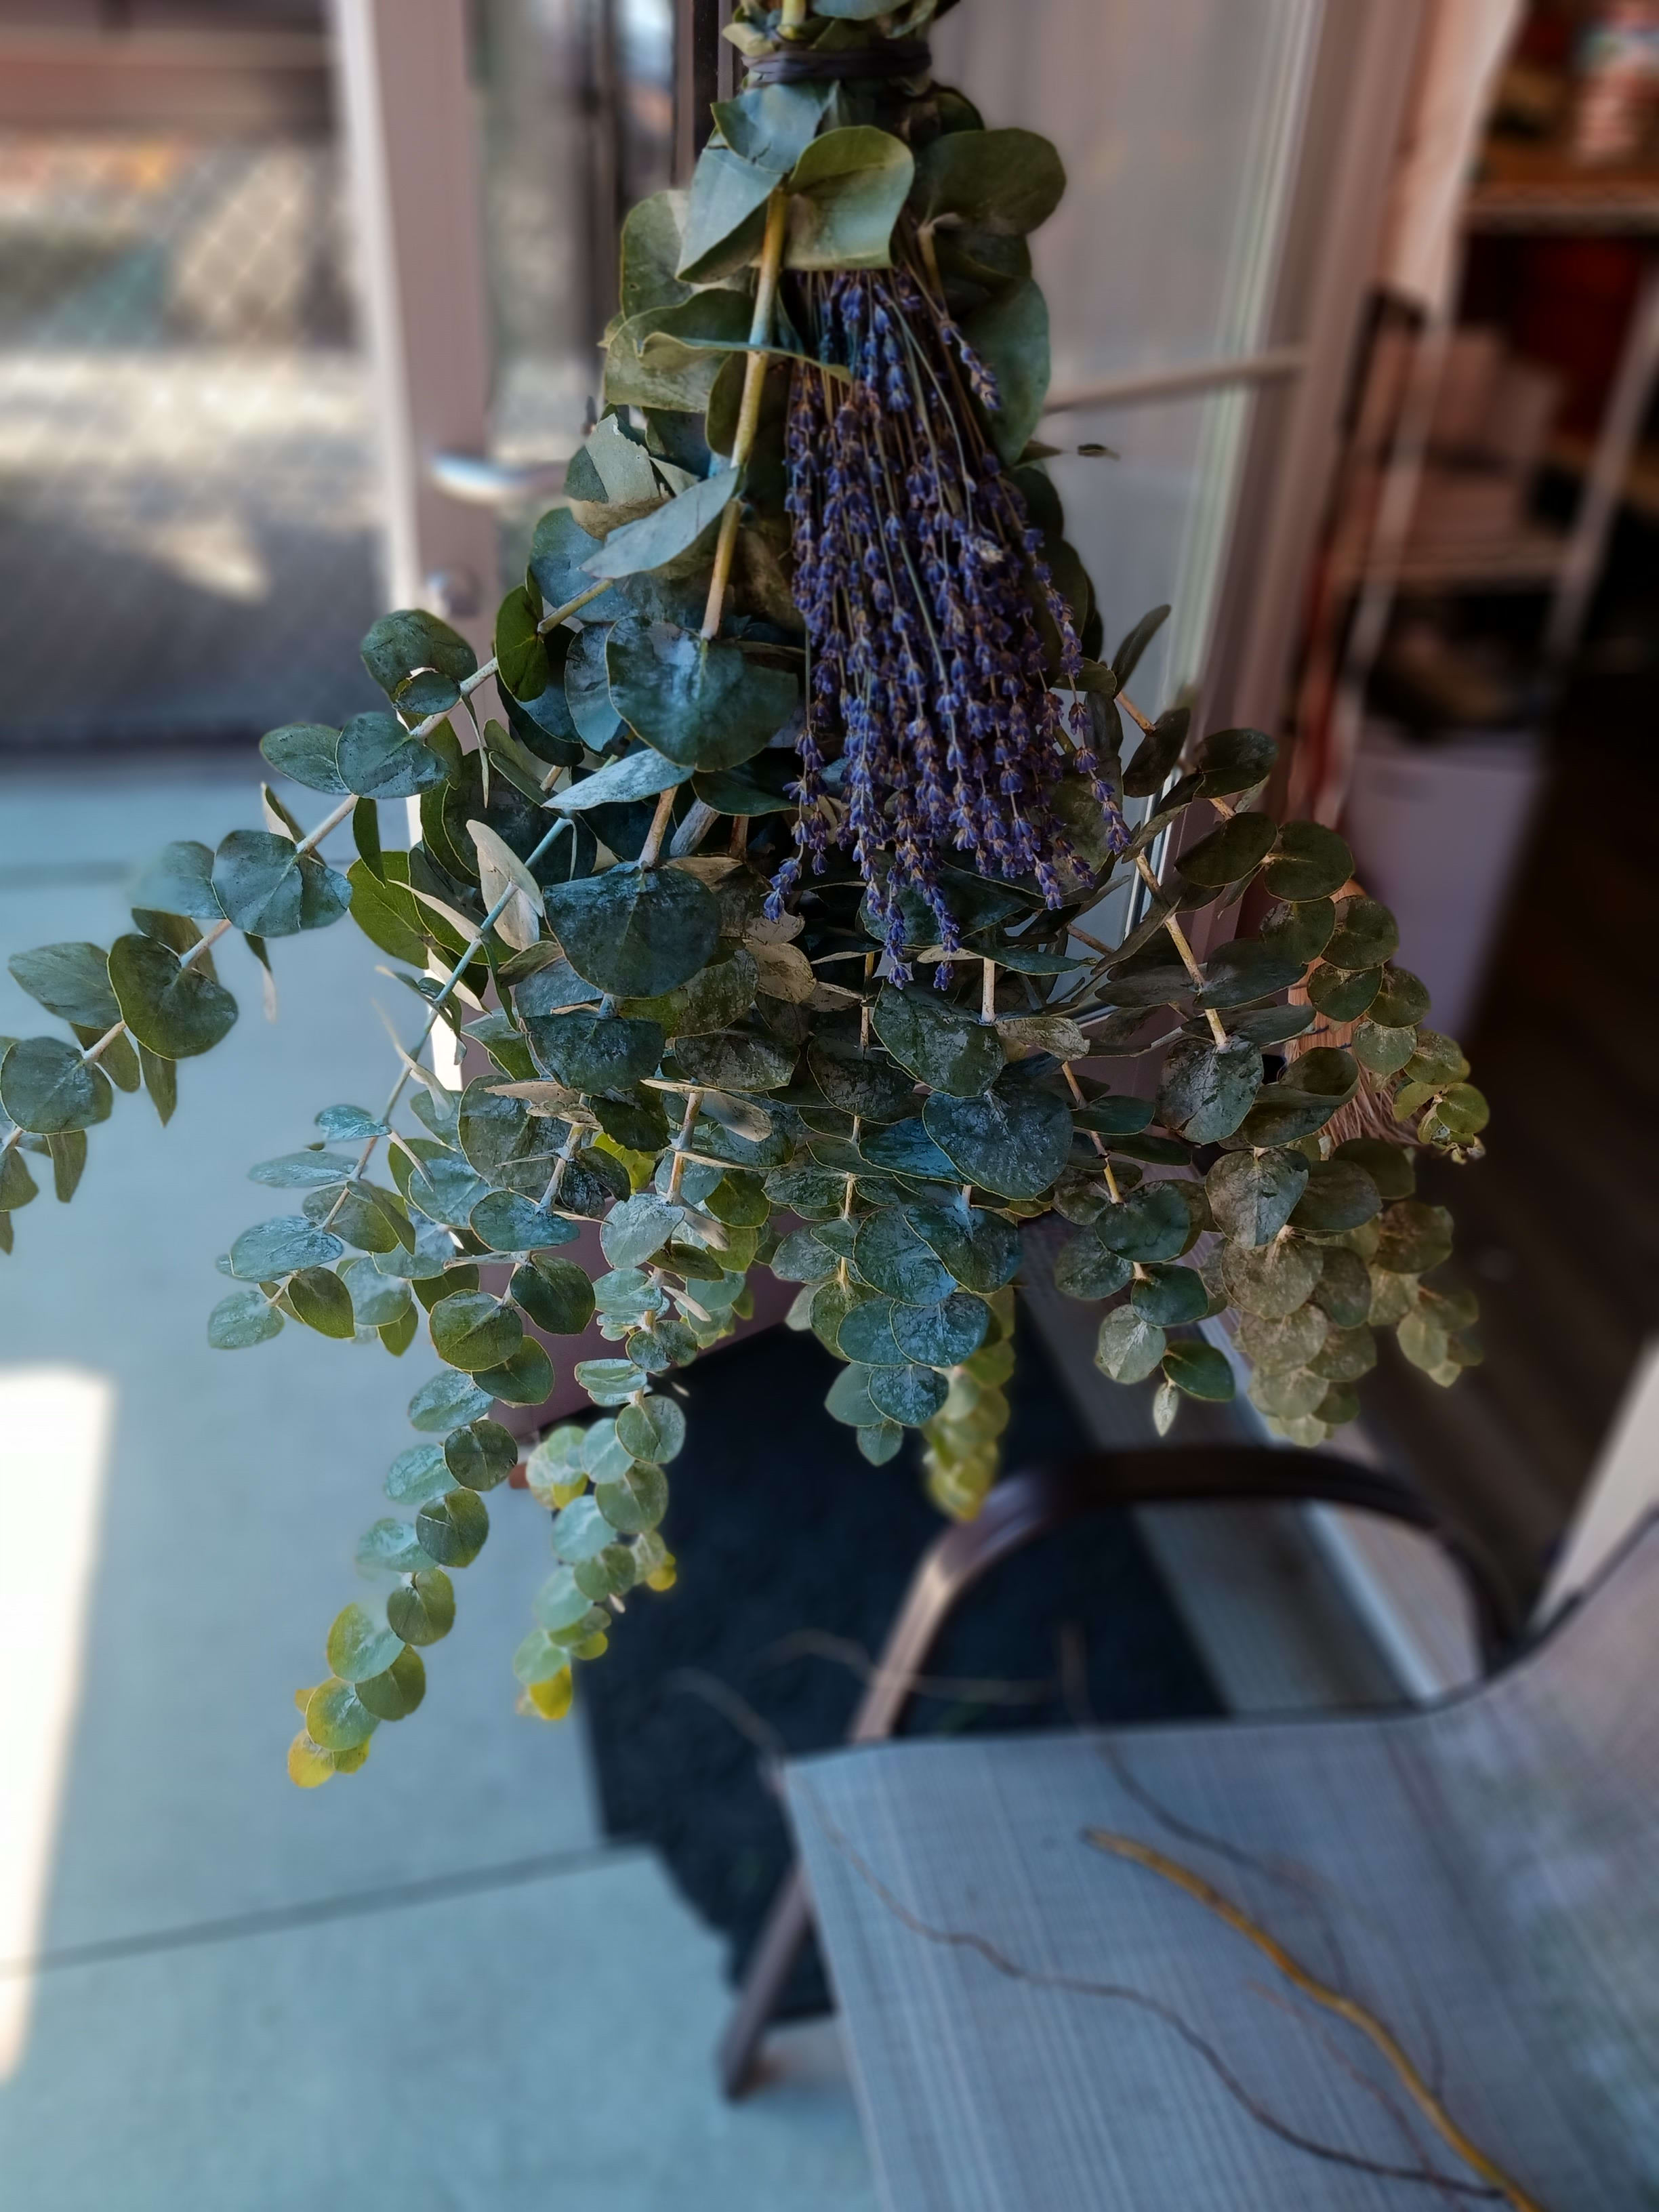 The Royal Bundle - A bundle of Lavender and Eucalypus wrapped with green twine so you can hang it right on your shower head. Breathe better.